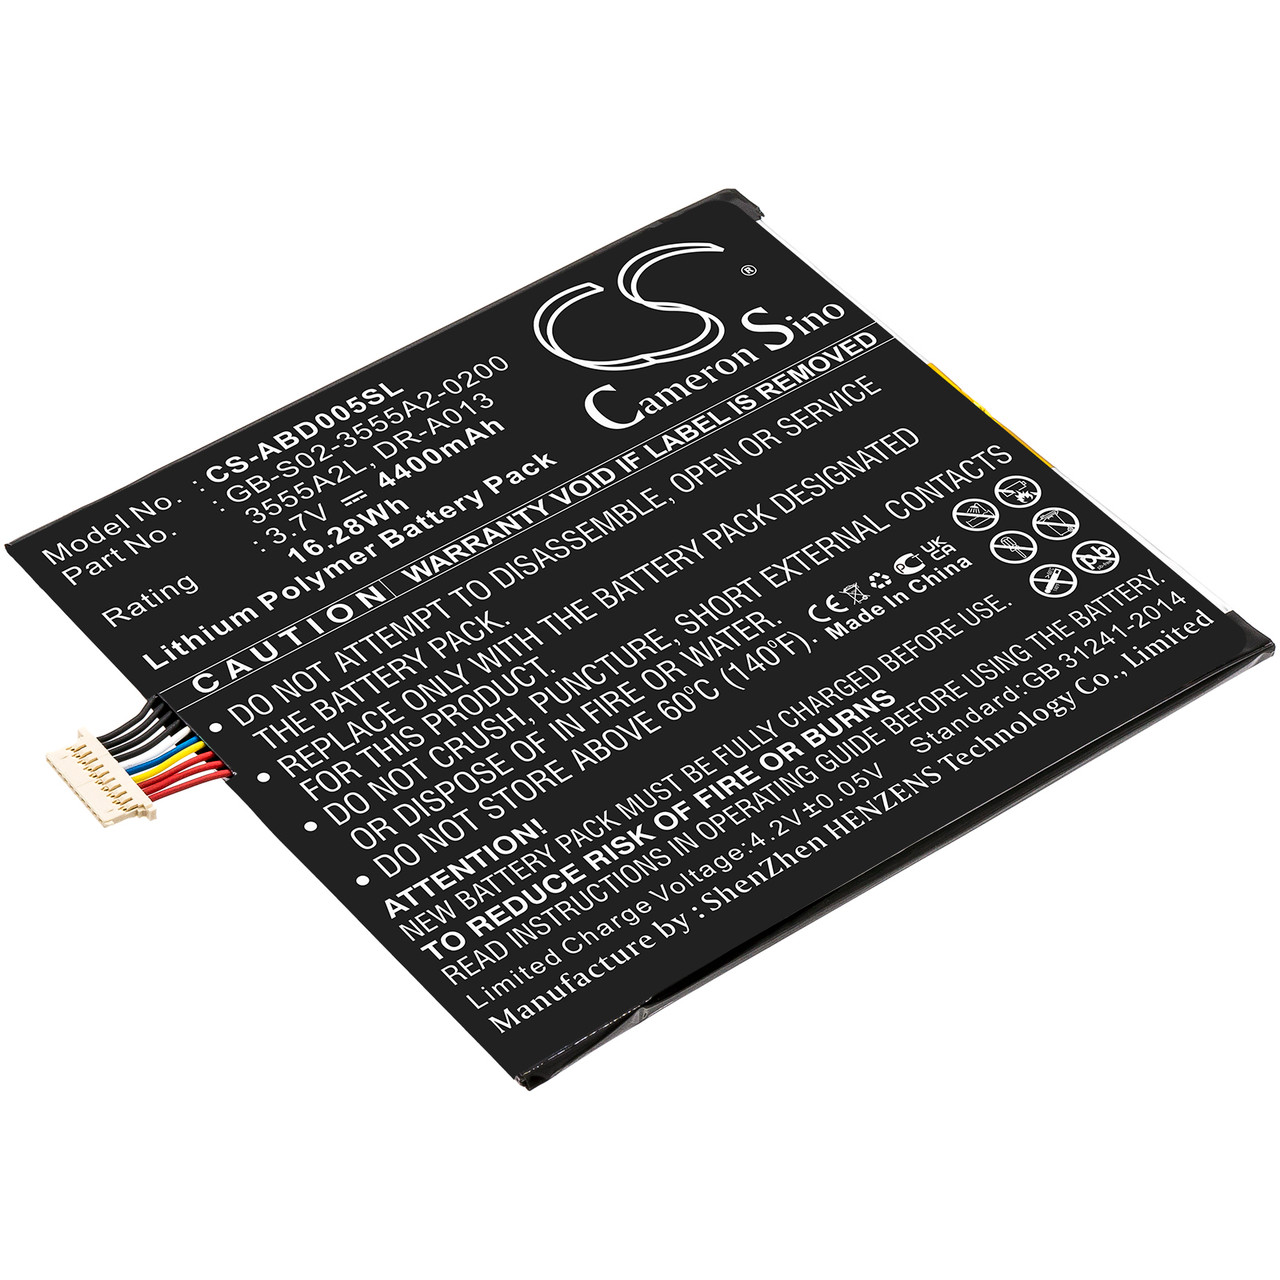 Amazon Kindle GB-S02-3555A2-0200 Tablet Battery